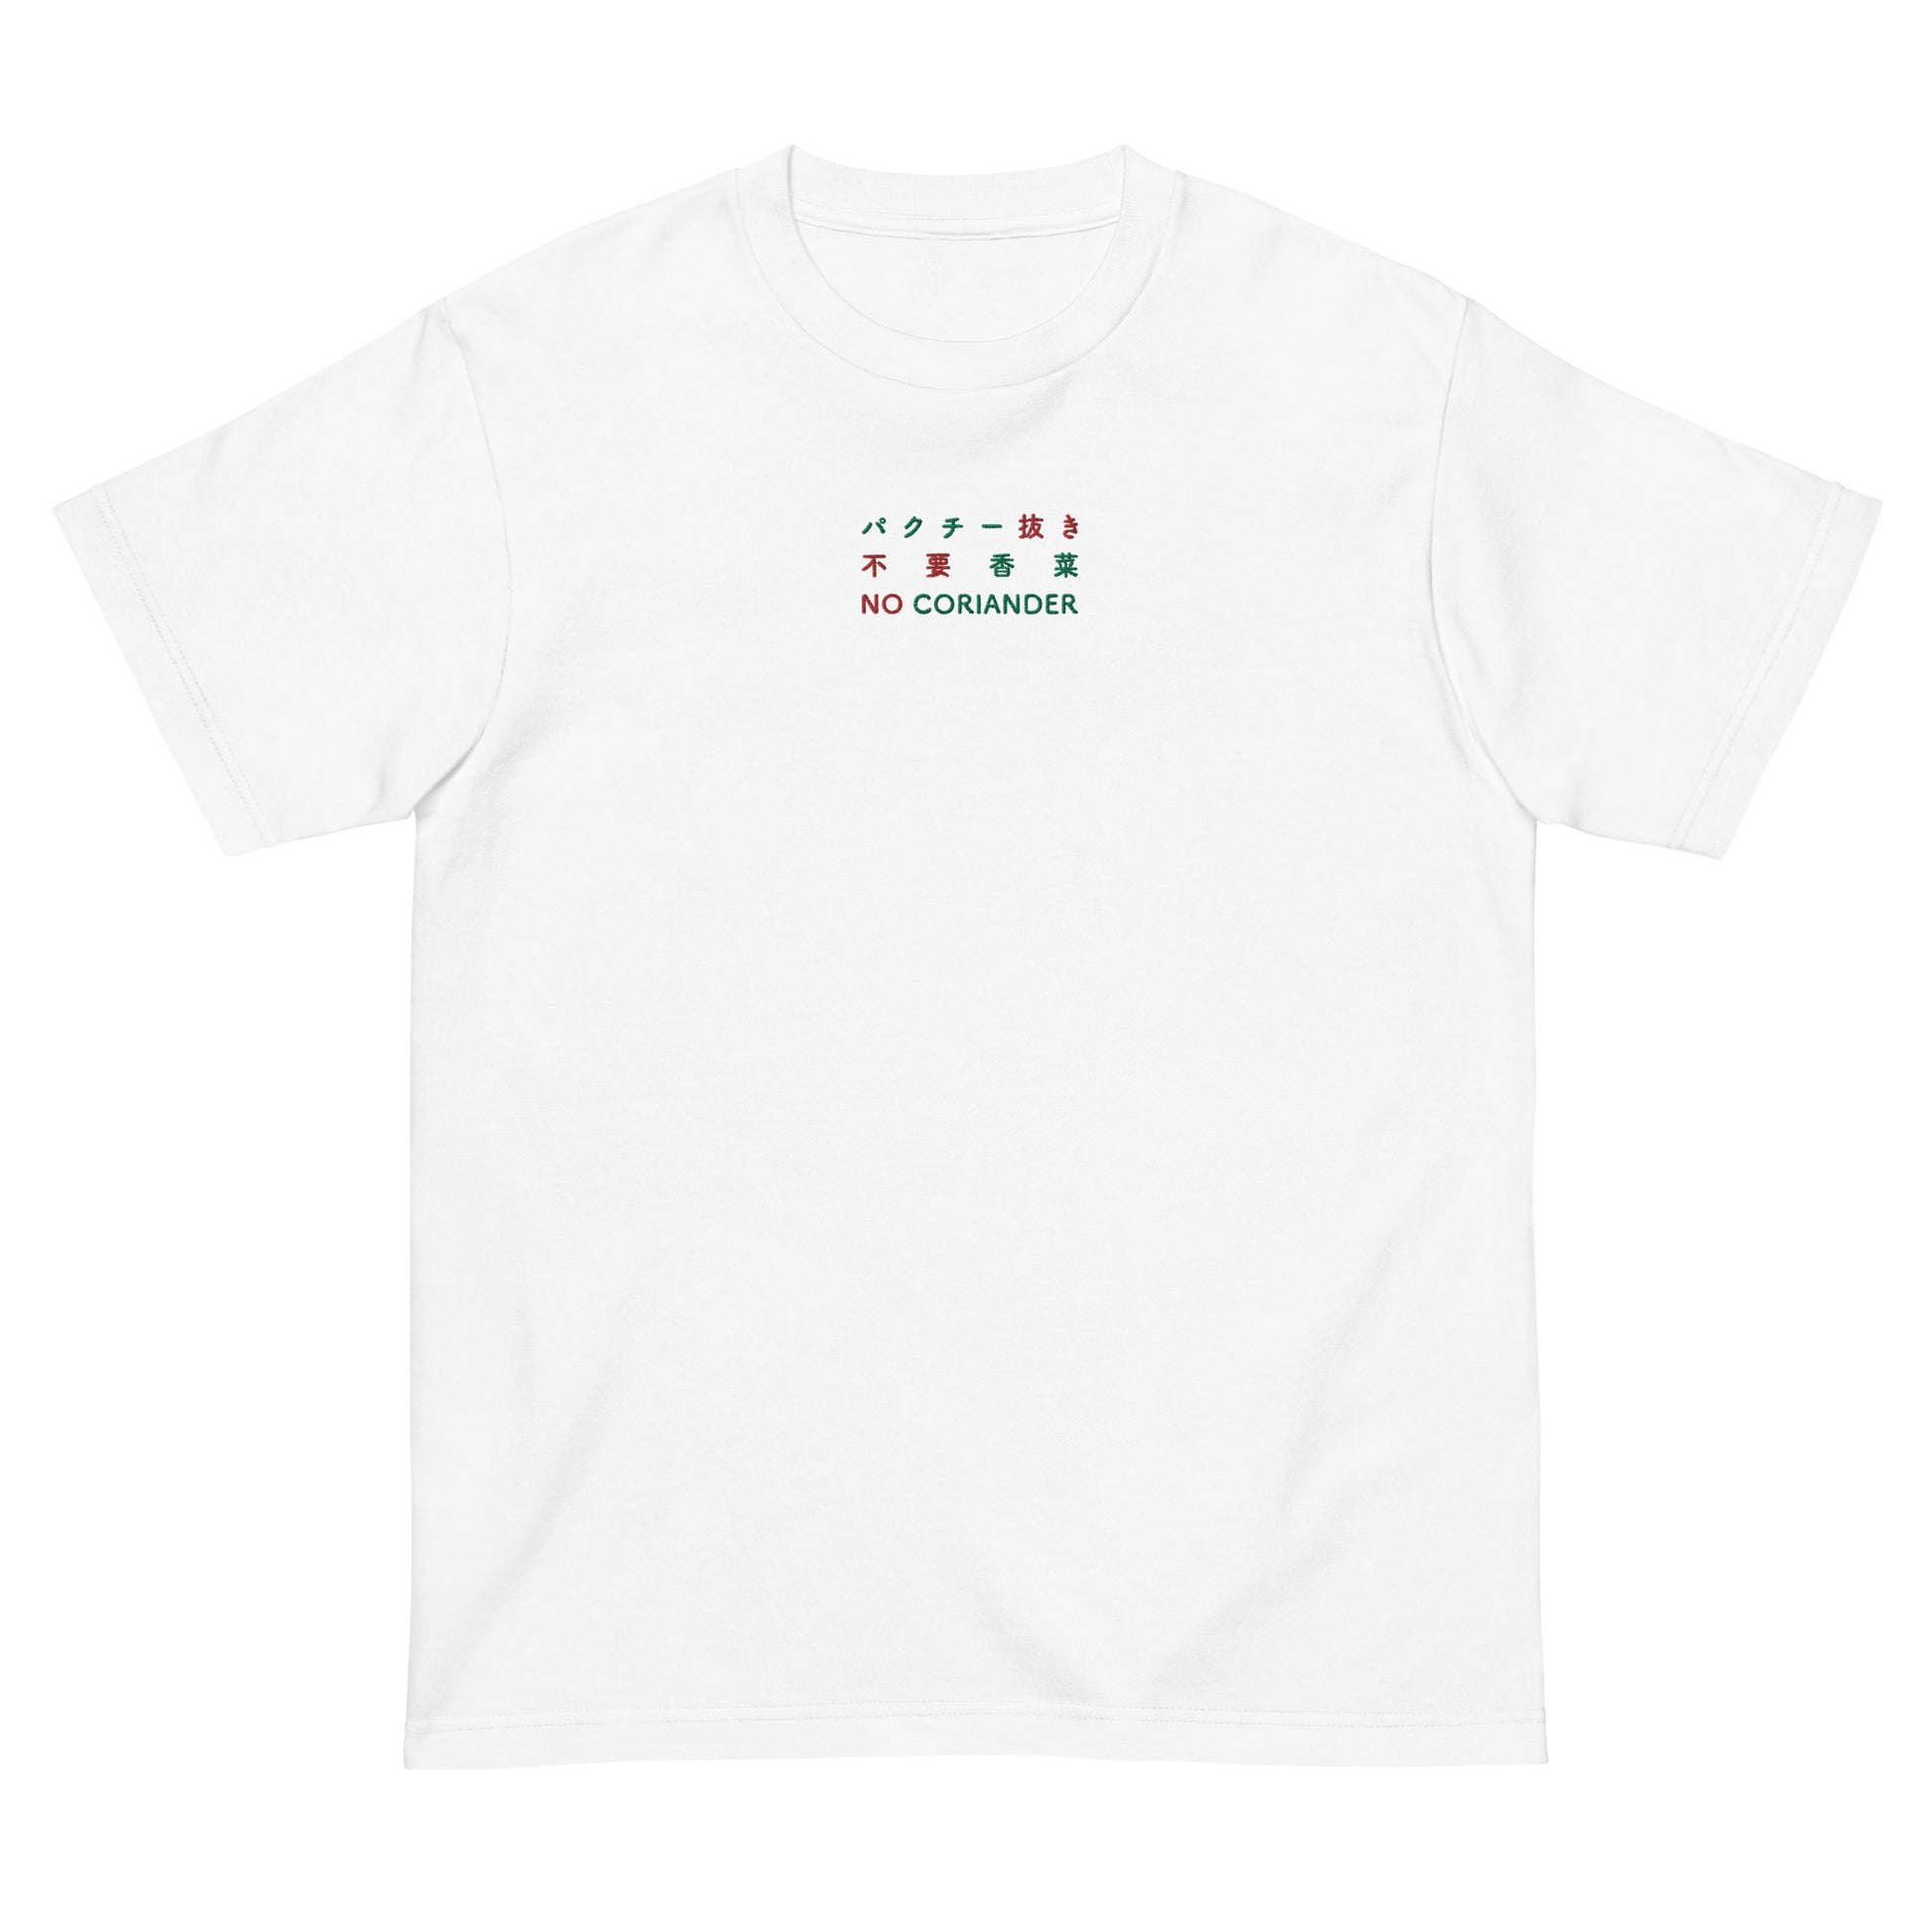 White High Quality Tee - Front Design with Red/Green Embroidery "NO CORIANDER" in three languages